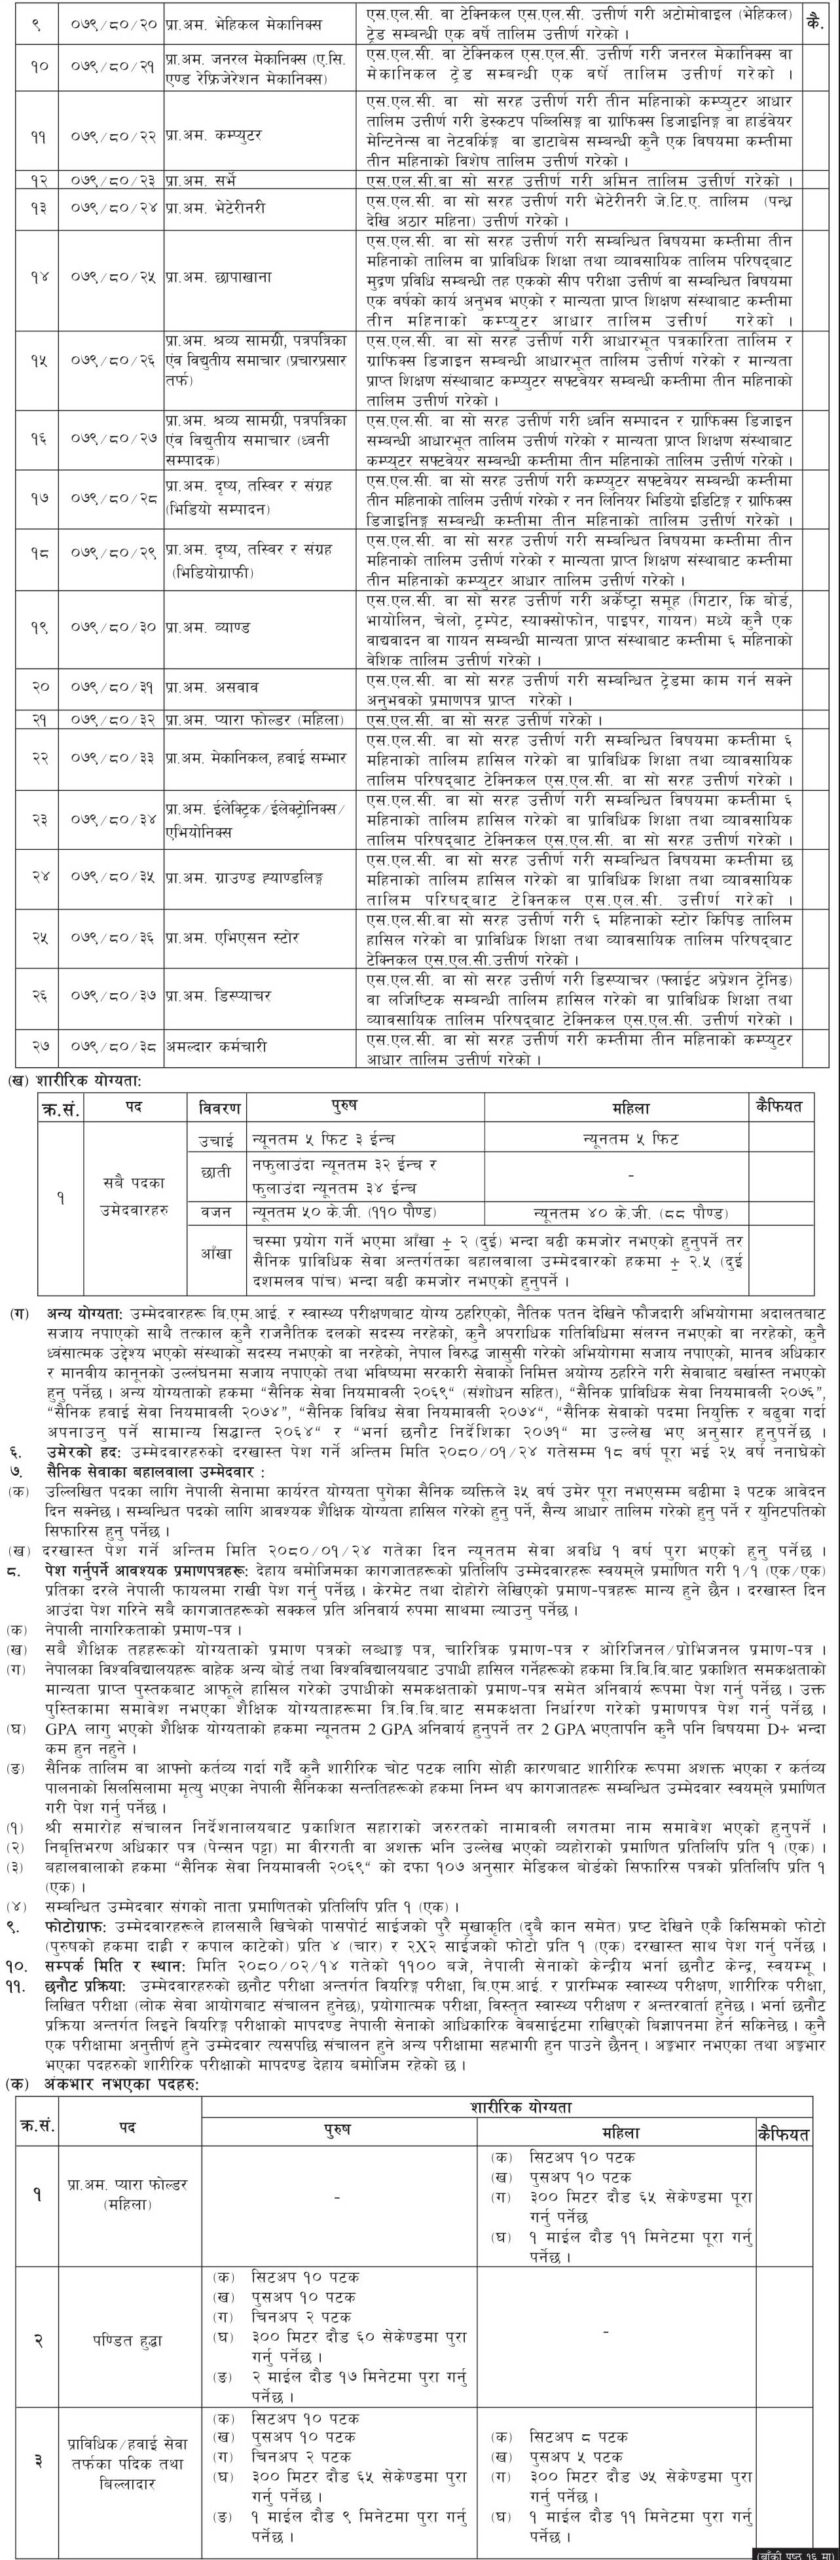 Nepali Army has Opened Job Vacancy for Various Posts in 2079